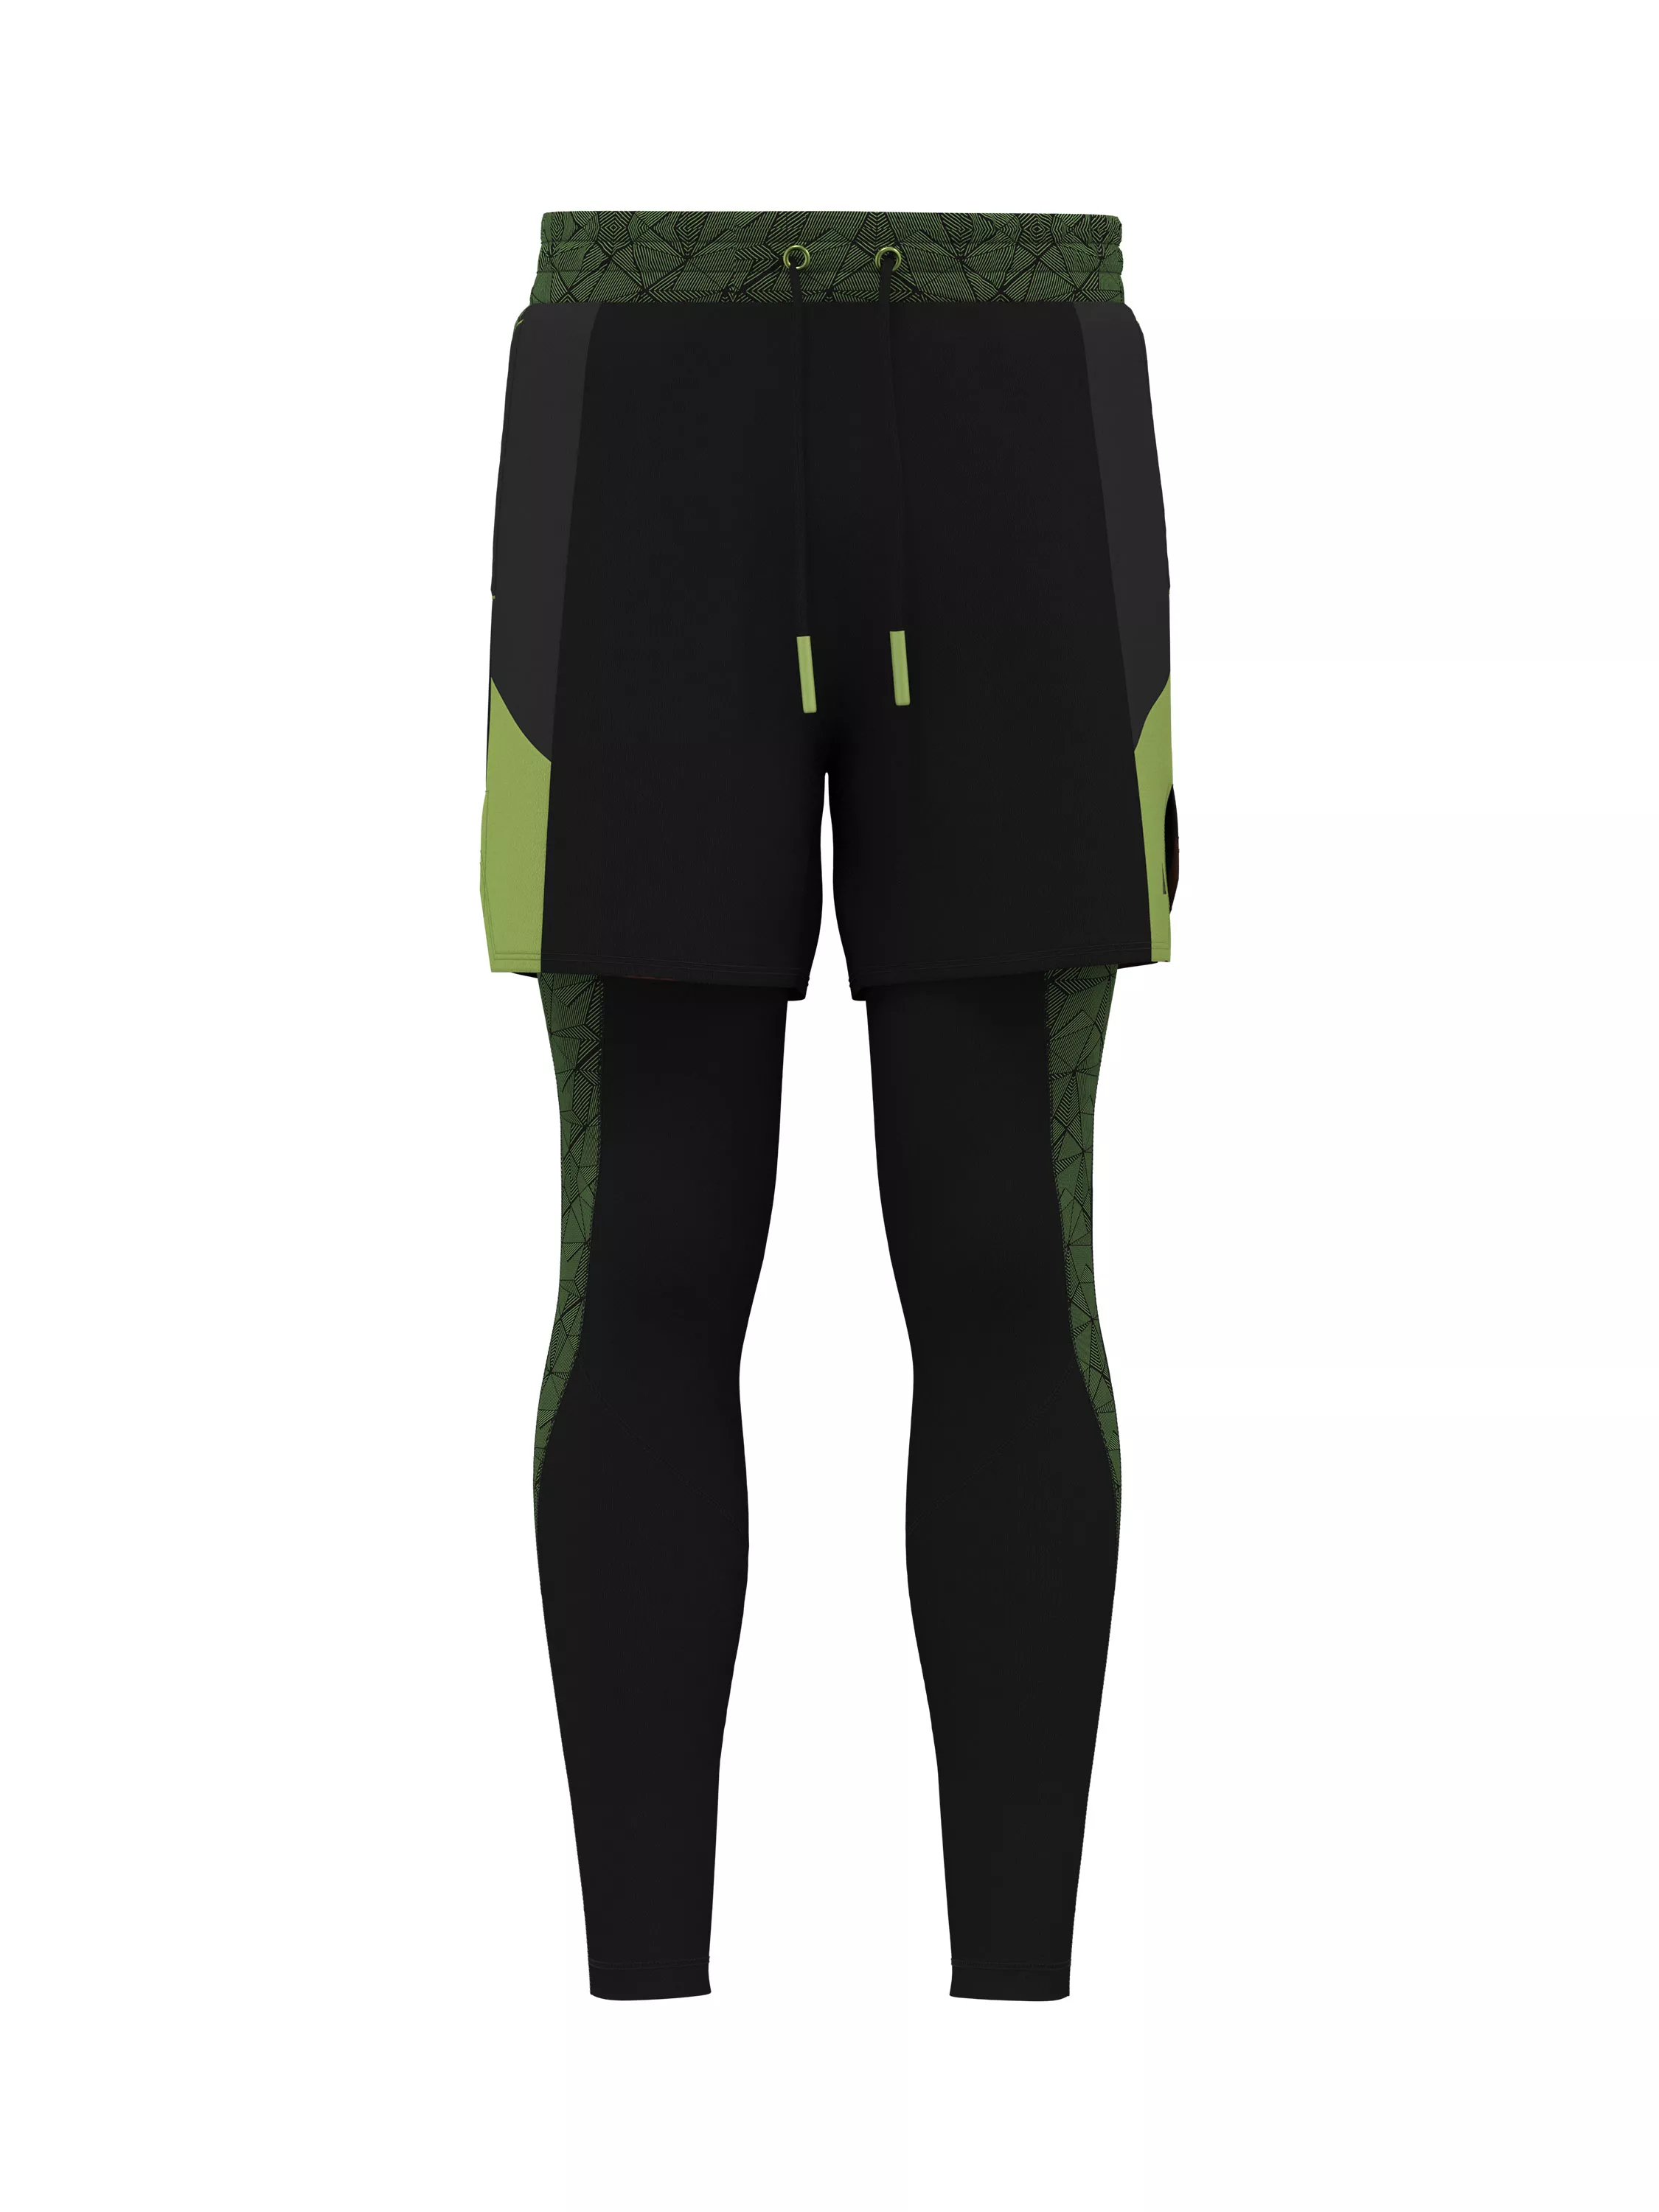 Mens Leggings & Tights with contrast Detail (front)